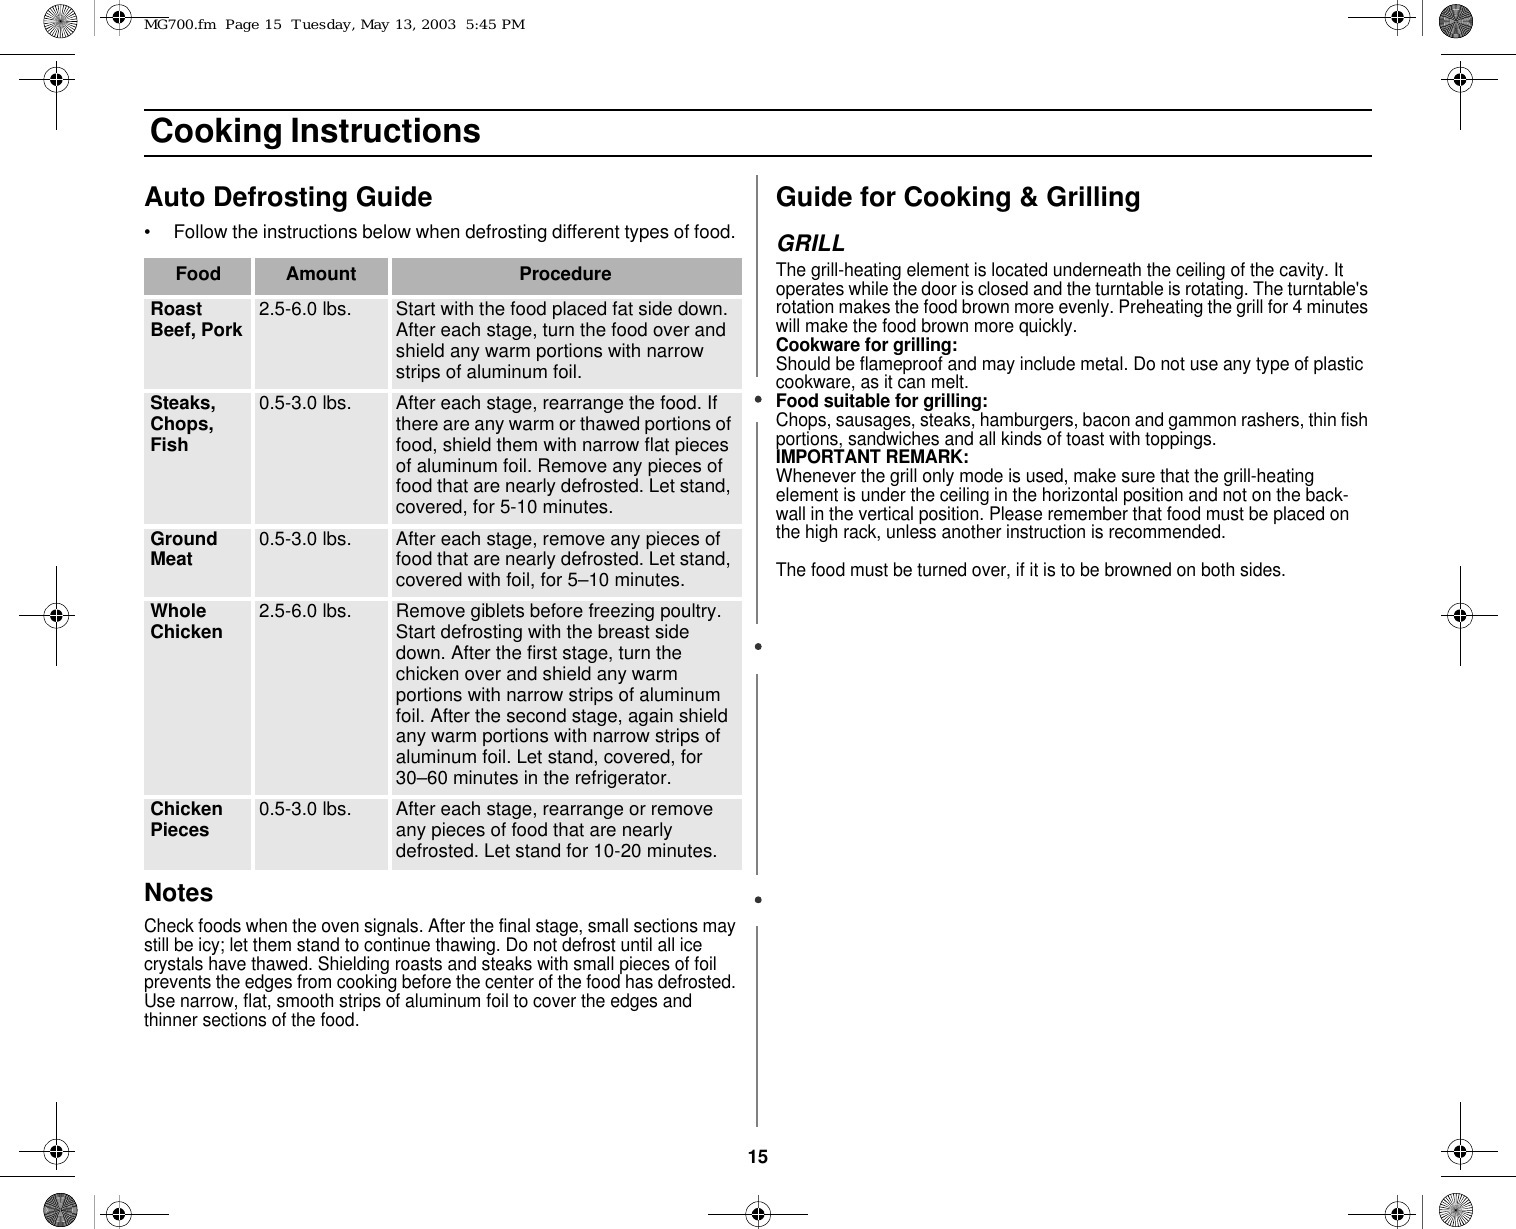 15 Cooking InstructionsAuto Defrosting Guide• Follow the instructions below when defrosting different types of food. NotesCheck foods when the oven signals. After the final stage, small sections may still be icy; let them stand to continue thawing. Do not defrost until all ice crystals have thawed. Shielding roasts and steaks with small pieces of foil prevents the edges from cooking before the center of the food has defrosted. Use narrow, flat, smooth strips of aluminum foil to cover the edges and thinner sections of the food.Guide for Cooking &amp; Grilling                   GRILLThe grill-heating element is located underneath the ceiling of the cavity. It operates while the door is closed and the turntable is rotating. The turntable&apos;s rotation makes the food brown more evenly. Preheating the grill for 4 minutes will make the food brown more quickly.Cookware for grilling:Should be flameproof and may include metal. Do not use any type of plastic cookware, as it can melt.Food suitable for grilling:Chops, sausages, steaks, hamburgers, bacon and gammon rashers, thin fish portions, sandwiches and all kinds of toast with toppings.IMPORTANT REMARK:Whenever the grill only mode is used, make sure that the grill-heating element is under the ceiling in the horizontal position and not on the back-wall in the vertical position. Please remember that food must be placed on the high rack, unless another instruction is recommended.The food must be turned over, if it is to be browned on both sides.Food Amount ProcedureRoast Beef, Pork 2.5-6.0 lbs. Start with the food placed fat side down. After each stage, turn the food over and shield any warm portions with narrow strips of aluminum foil.Steaks, Chops, Fish0.5-3.0 lbs. After each stage, rearrange the food. If there are any warm or thawed portions of food, shield them with narrow flat pieces of aluminum foil. Remove any pieces of food that are nearly defrosted. Let stand, covered, for 5-10 minutes.Ground Meat 0.5-3.0 lbs. After each stage, remove any pieces of food that are nearly defrosted. Let stand, covered with foil, for 5–10 minutes.Whole Chicken  2.5-6.0 lbs. Remove giblets before freezing poultry. Start defrosting with the breast side down. After the first stage, turn the chicken over and shield any warm portions with narrow strips of aluminum foil. After the second stage, again shield any warm portions with narrow strips of aluminum foil. Let stand, covered, for 30–60 minutes in the refrigerator.Chicken Pieces 0.5-3.0 lbs. After each stage, rearrange or remove any pieces of food that are nearly defrosted. Let stand for 10-20 minutes.MG700.fm  Page 15  Tuesday, May 13, 2003  5:45 PM